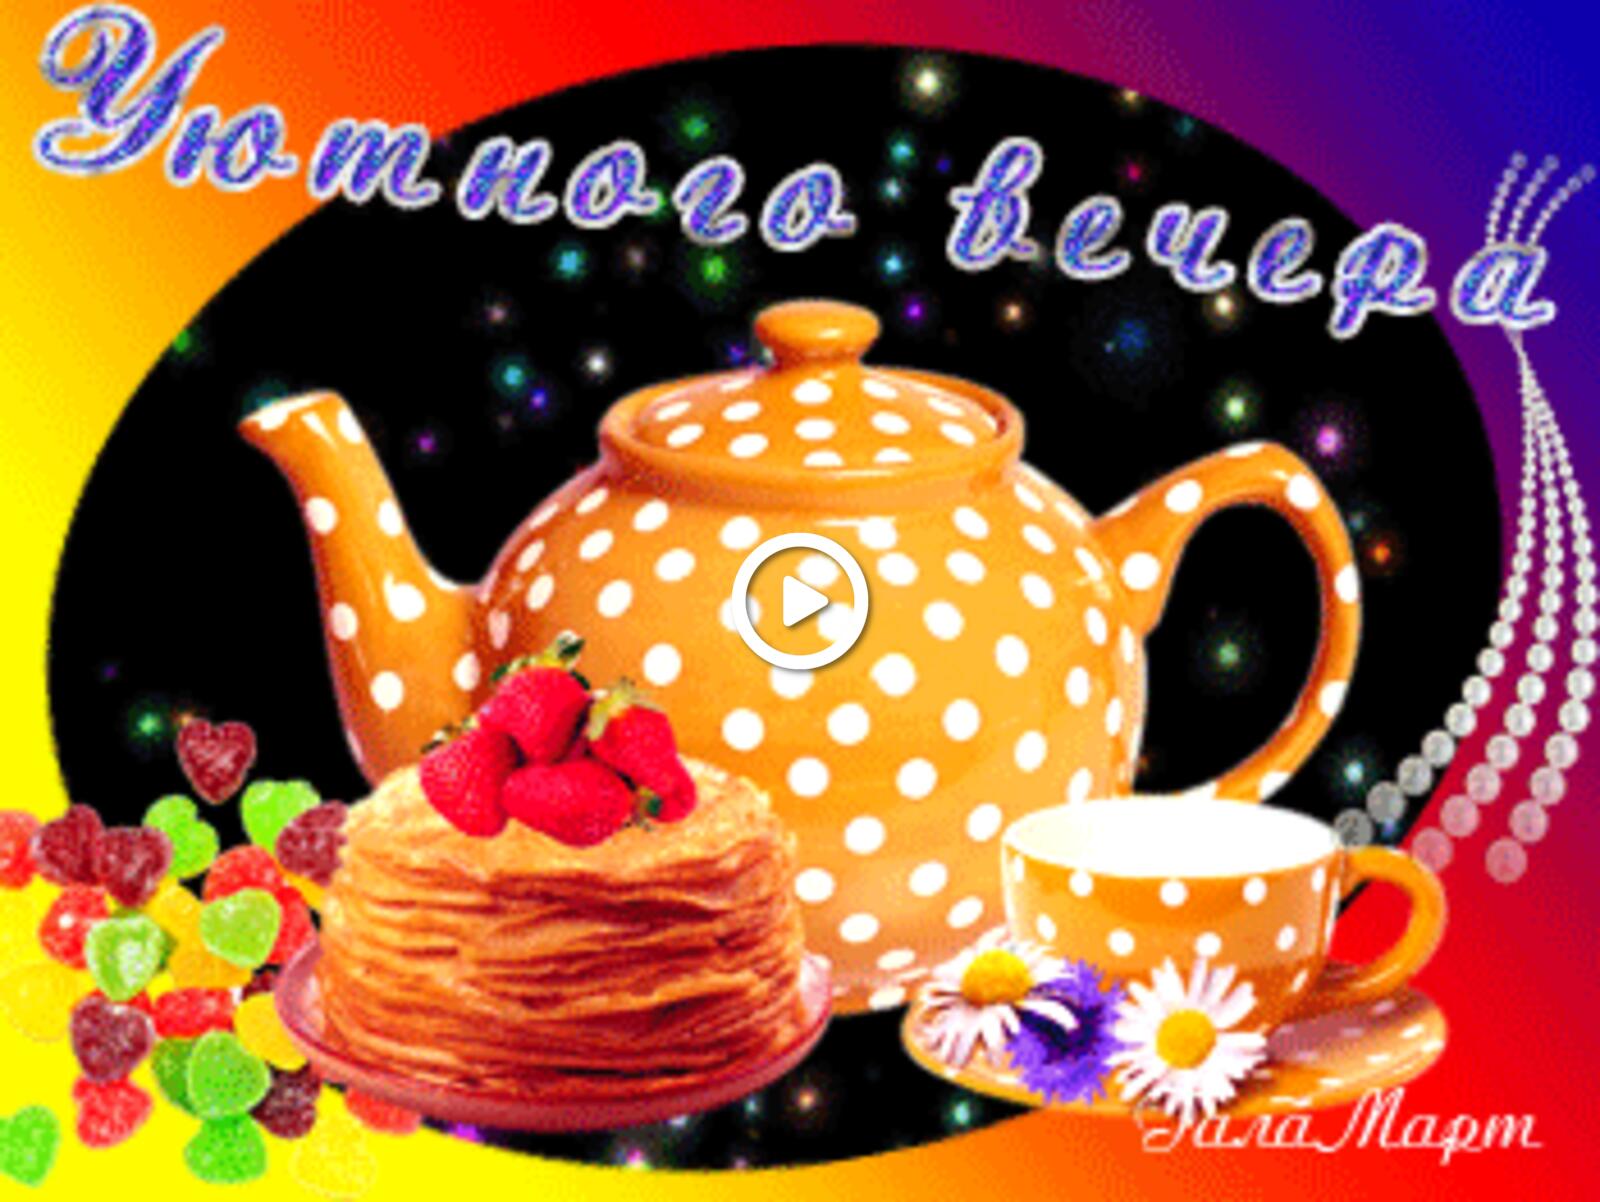 A postcard on the subject of good evening pictures pancakes a cup for free